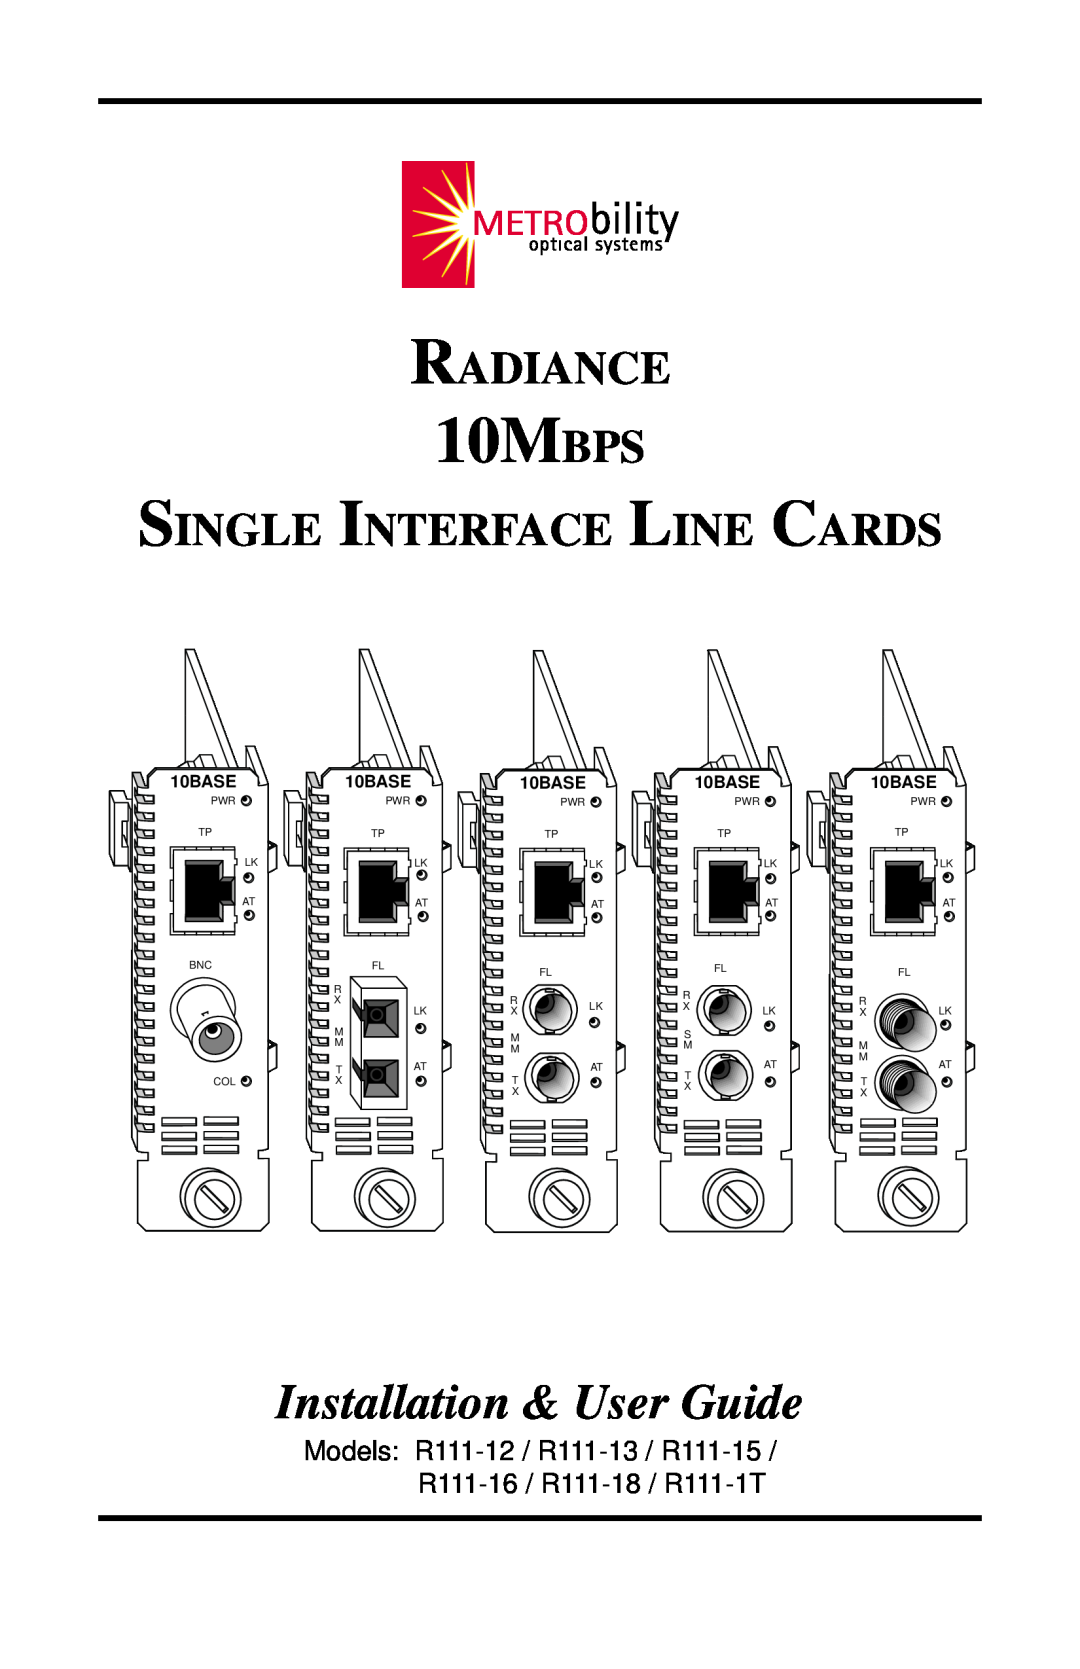 METRObility Optical Systems R111-15 manual 10MBPS, Installation & User Guide, Radiance, Single Interface Line Cards 